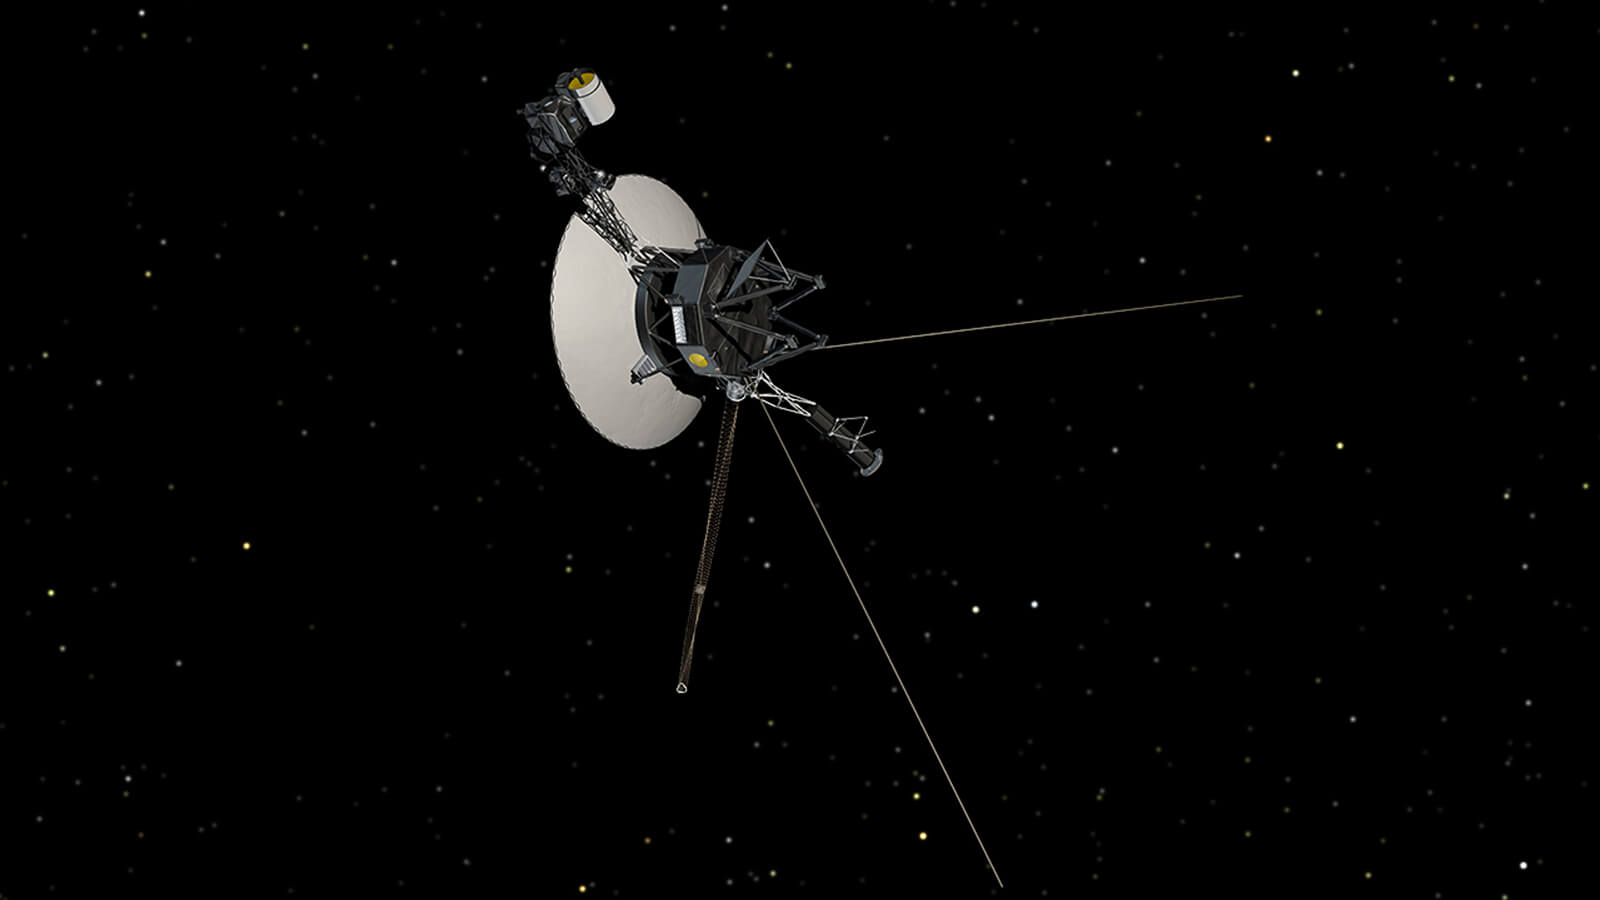 NASA managed to establish contact with the probe Voyager 2 after the mysterious failure